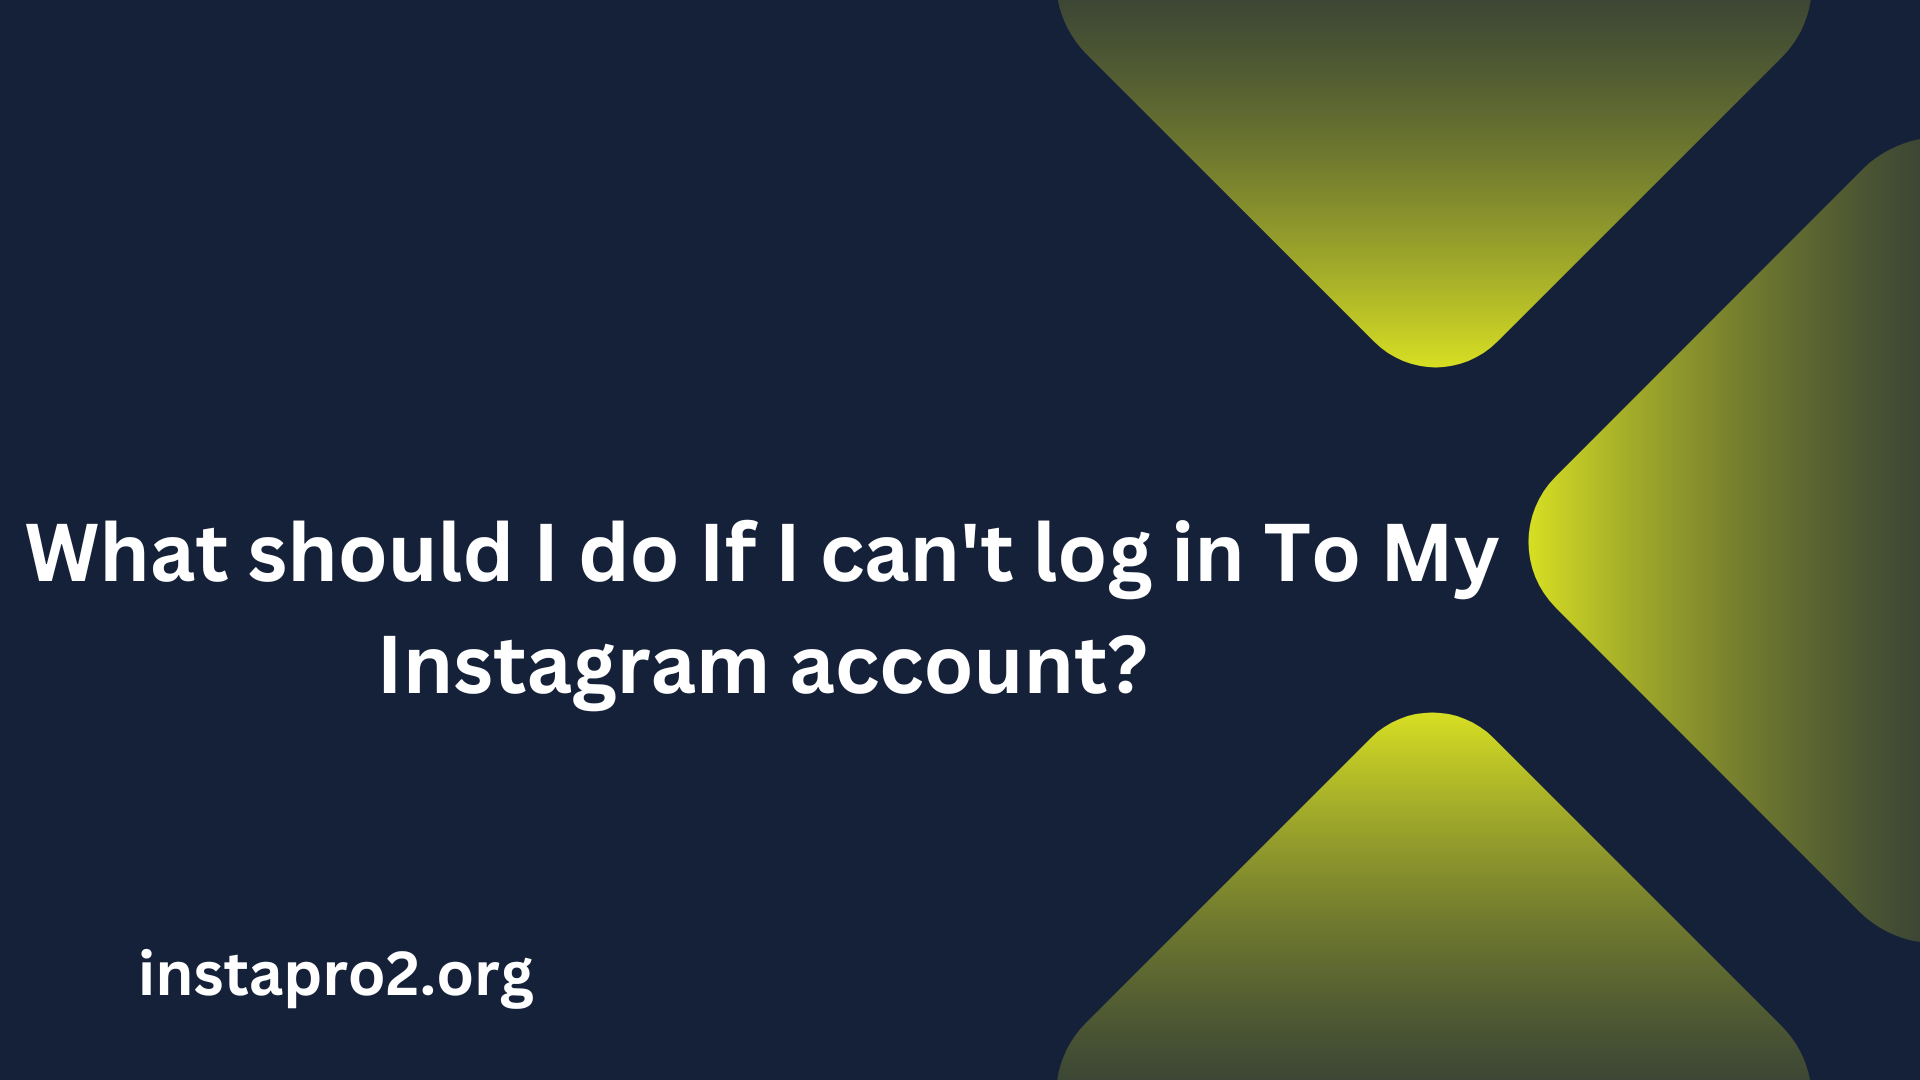 What should I do If I can't log in To My Instagram account?